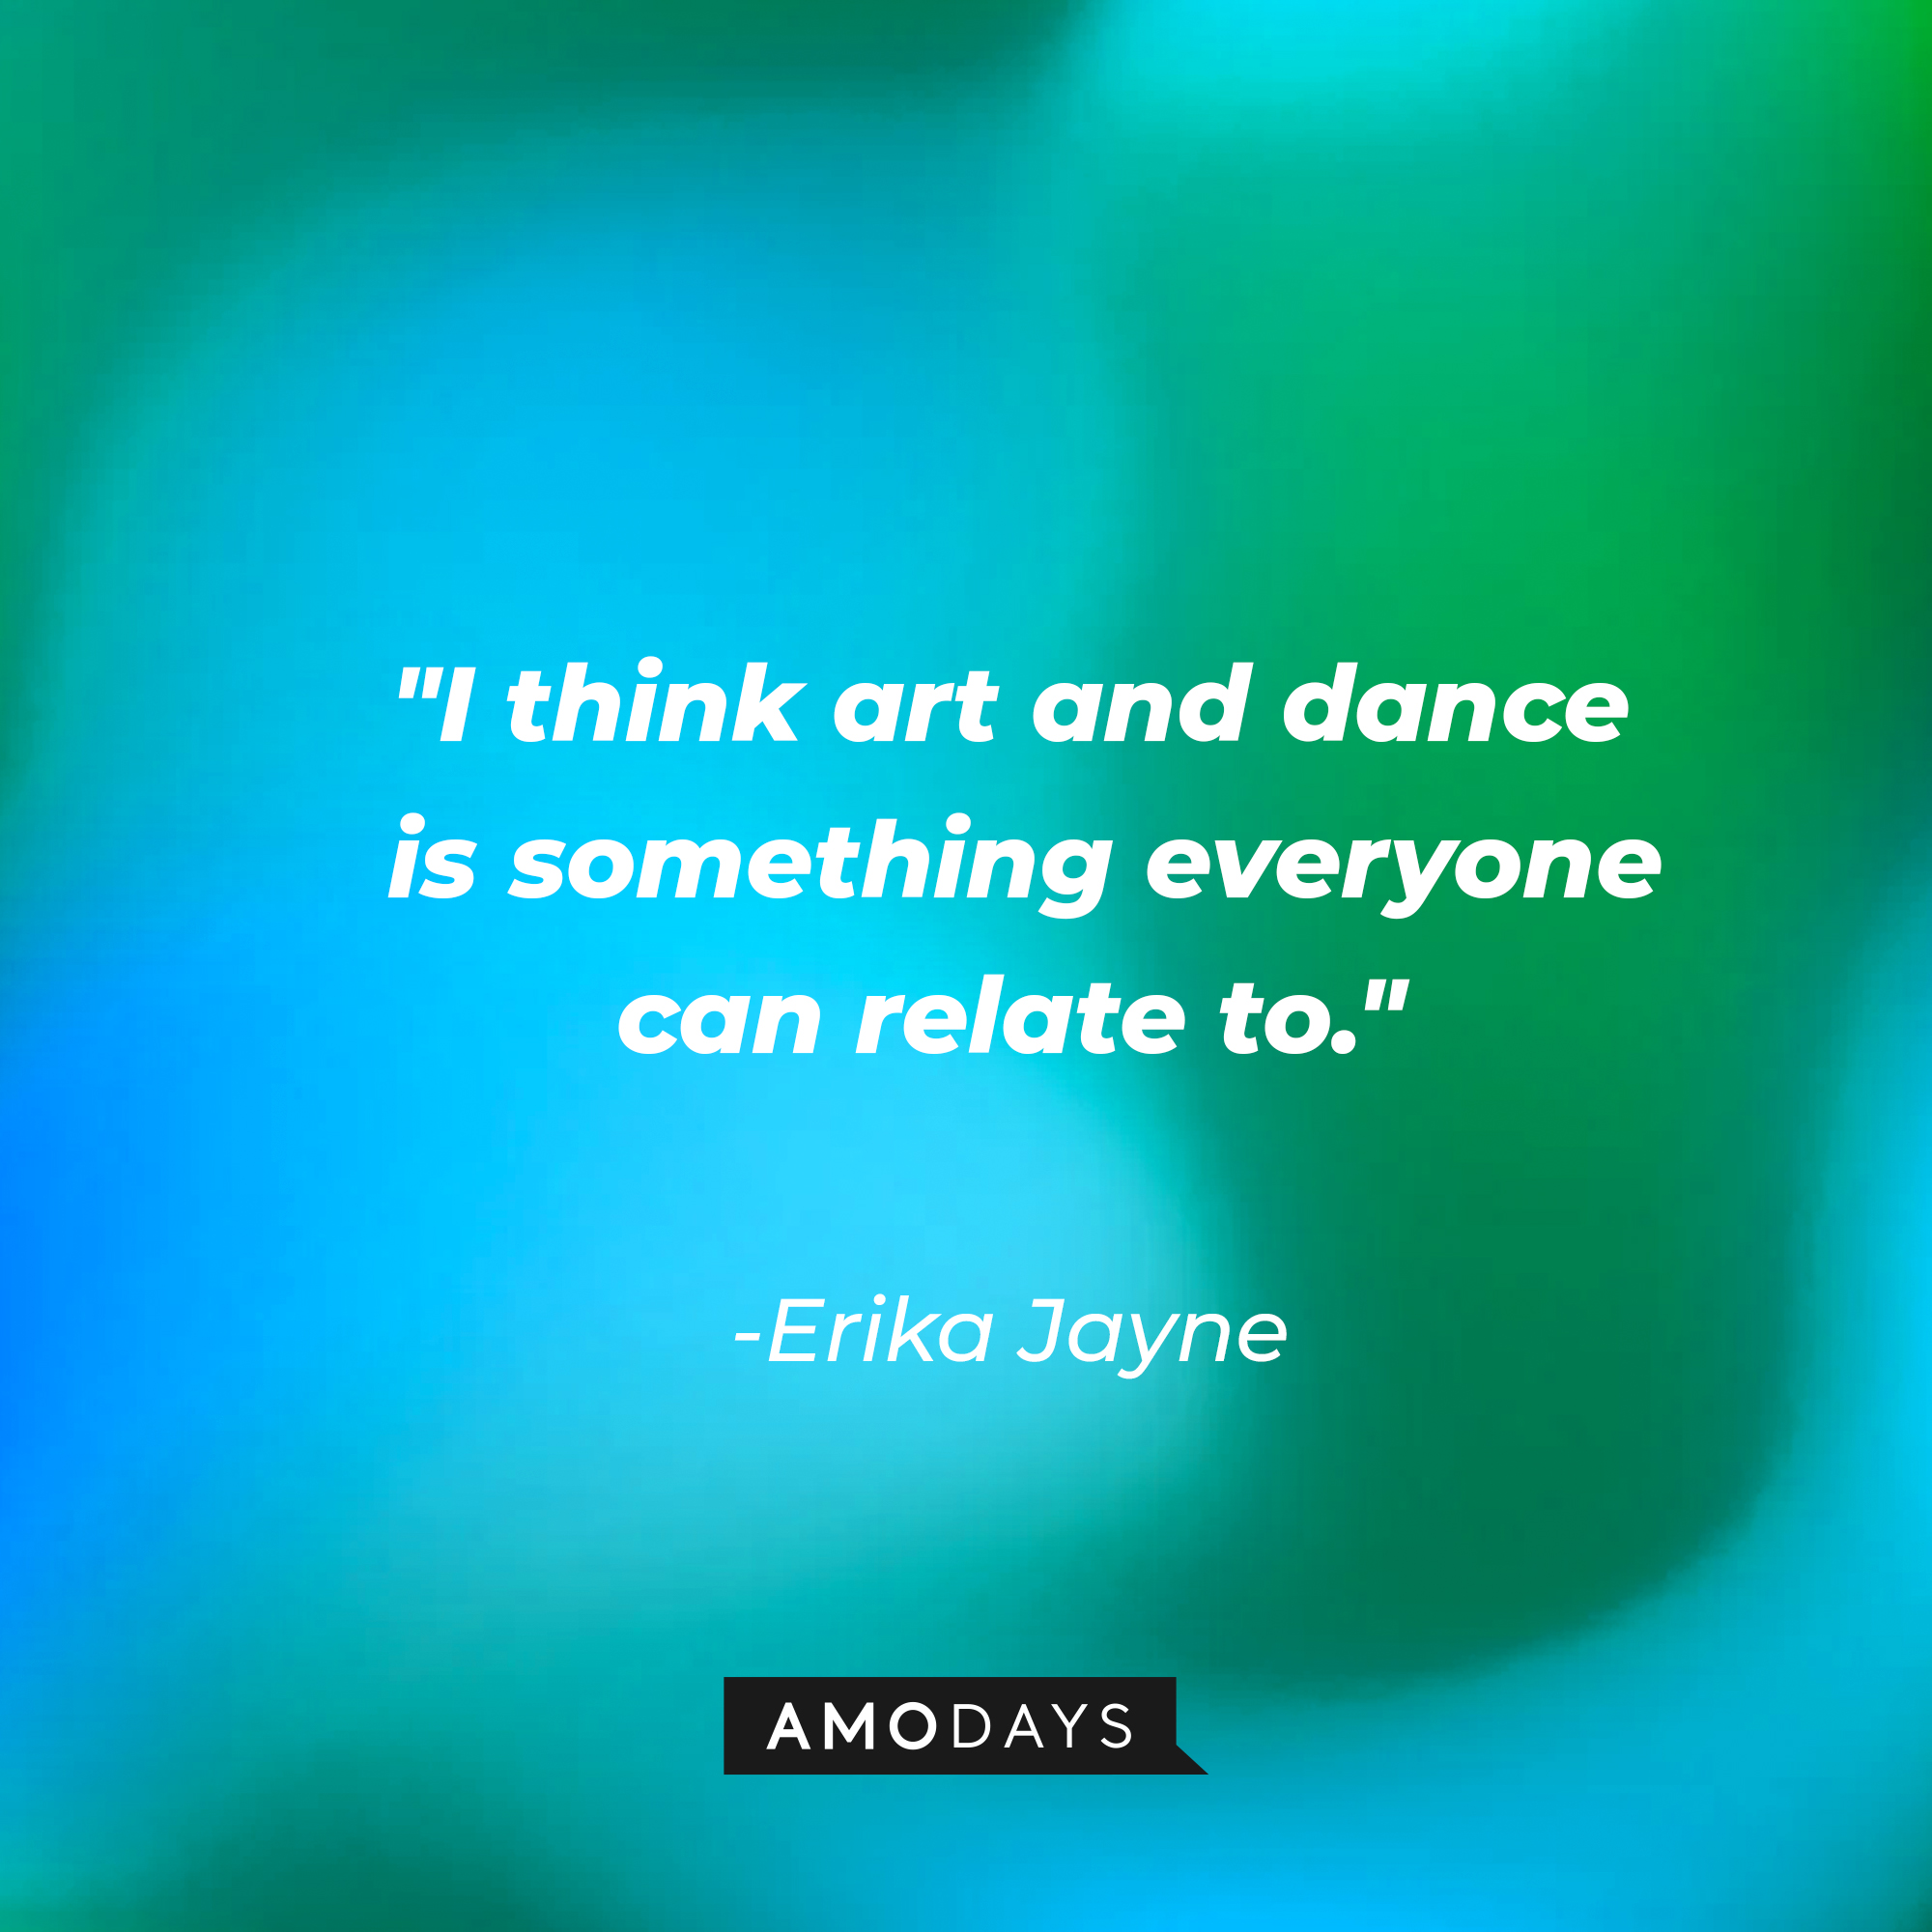 Erika Jayne’s quote: "I think art and dance is something everyone can relate to." | Image: Amodays